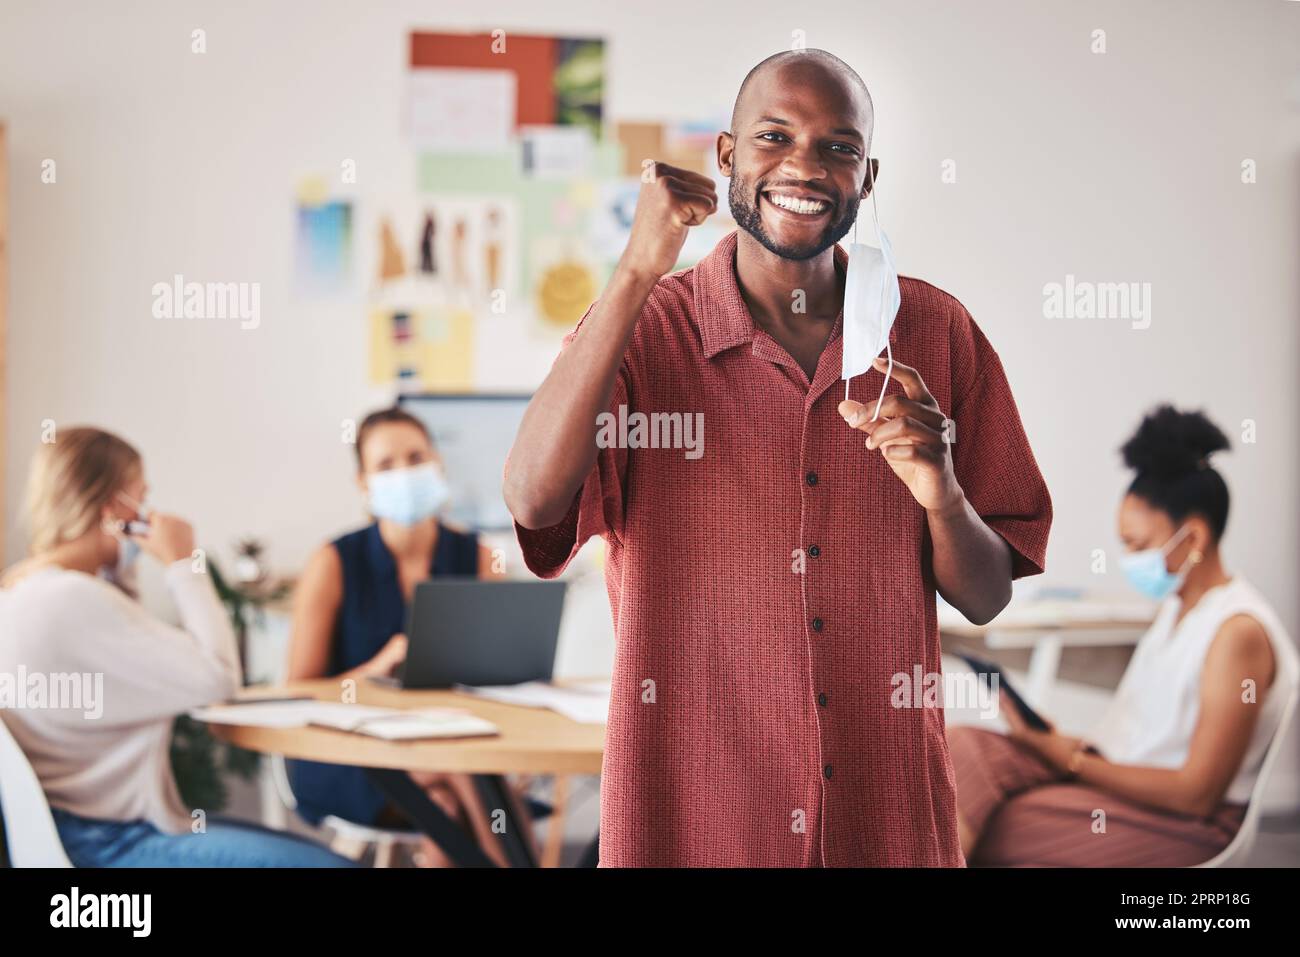 Face mask, excited business man and covid compliance portrait with motivation vision to stop global danger virus. Smile, happy and success for black office businessman in end of pandemic celebration Stock Photo